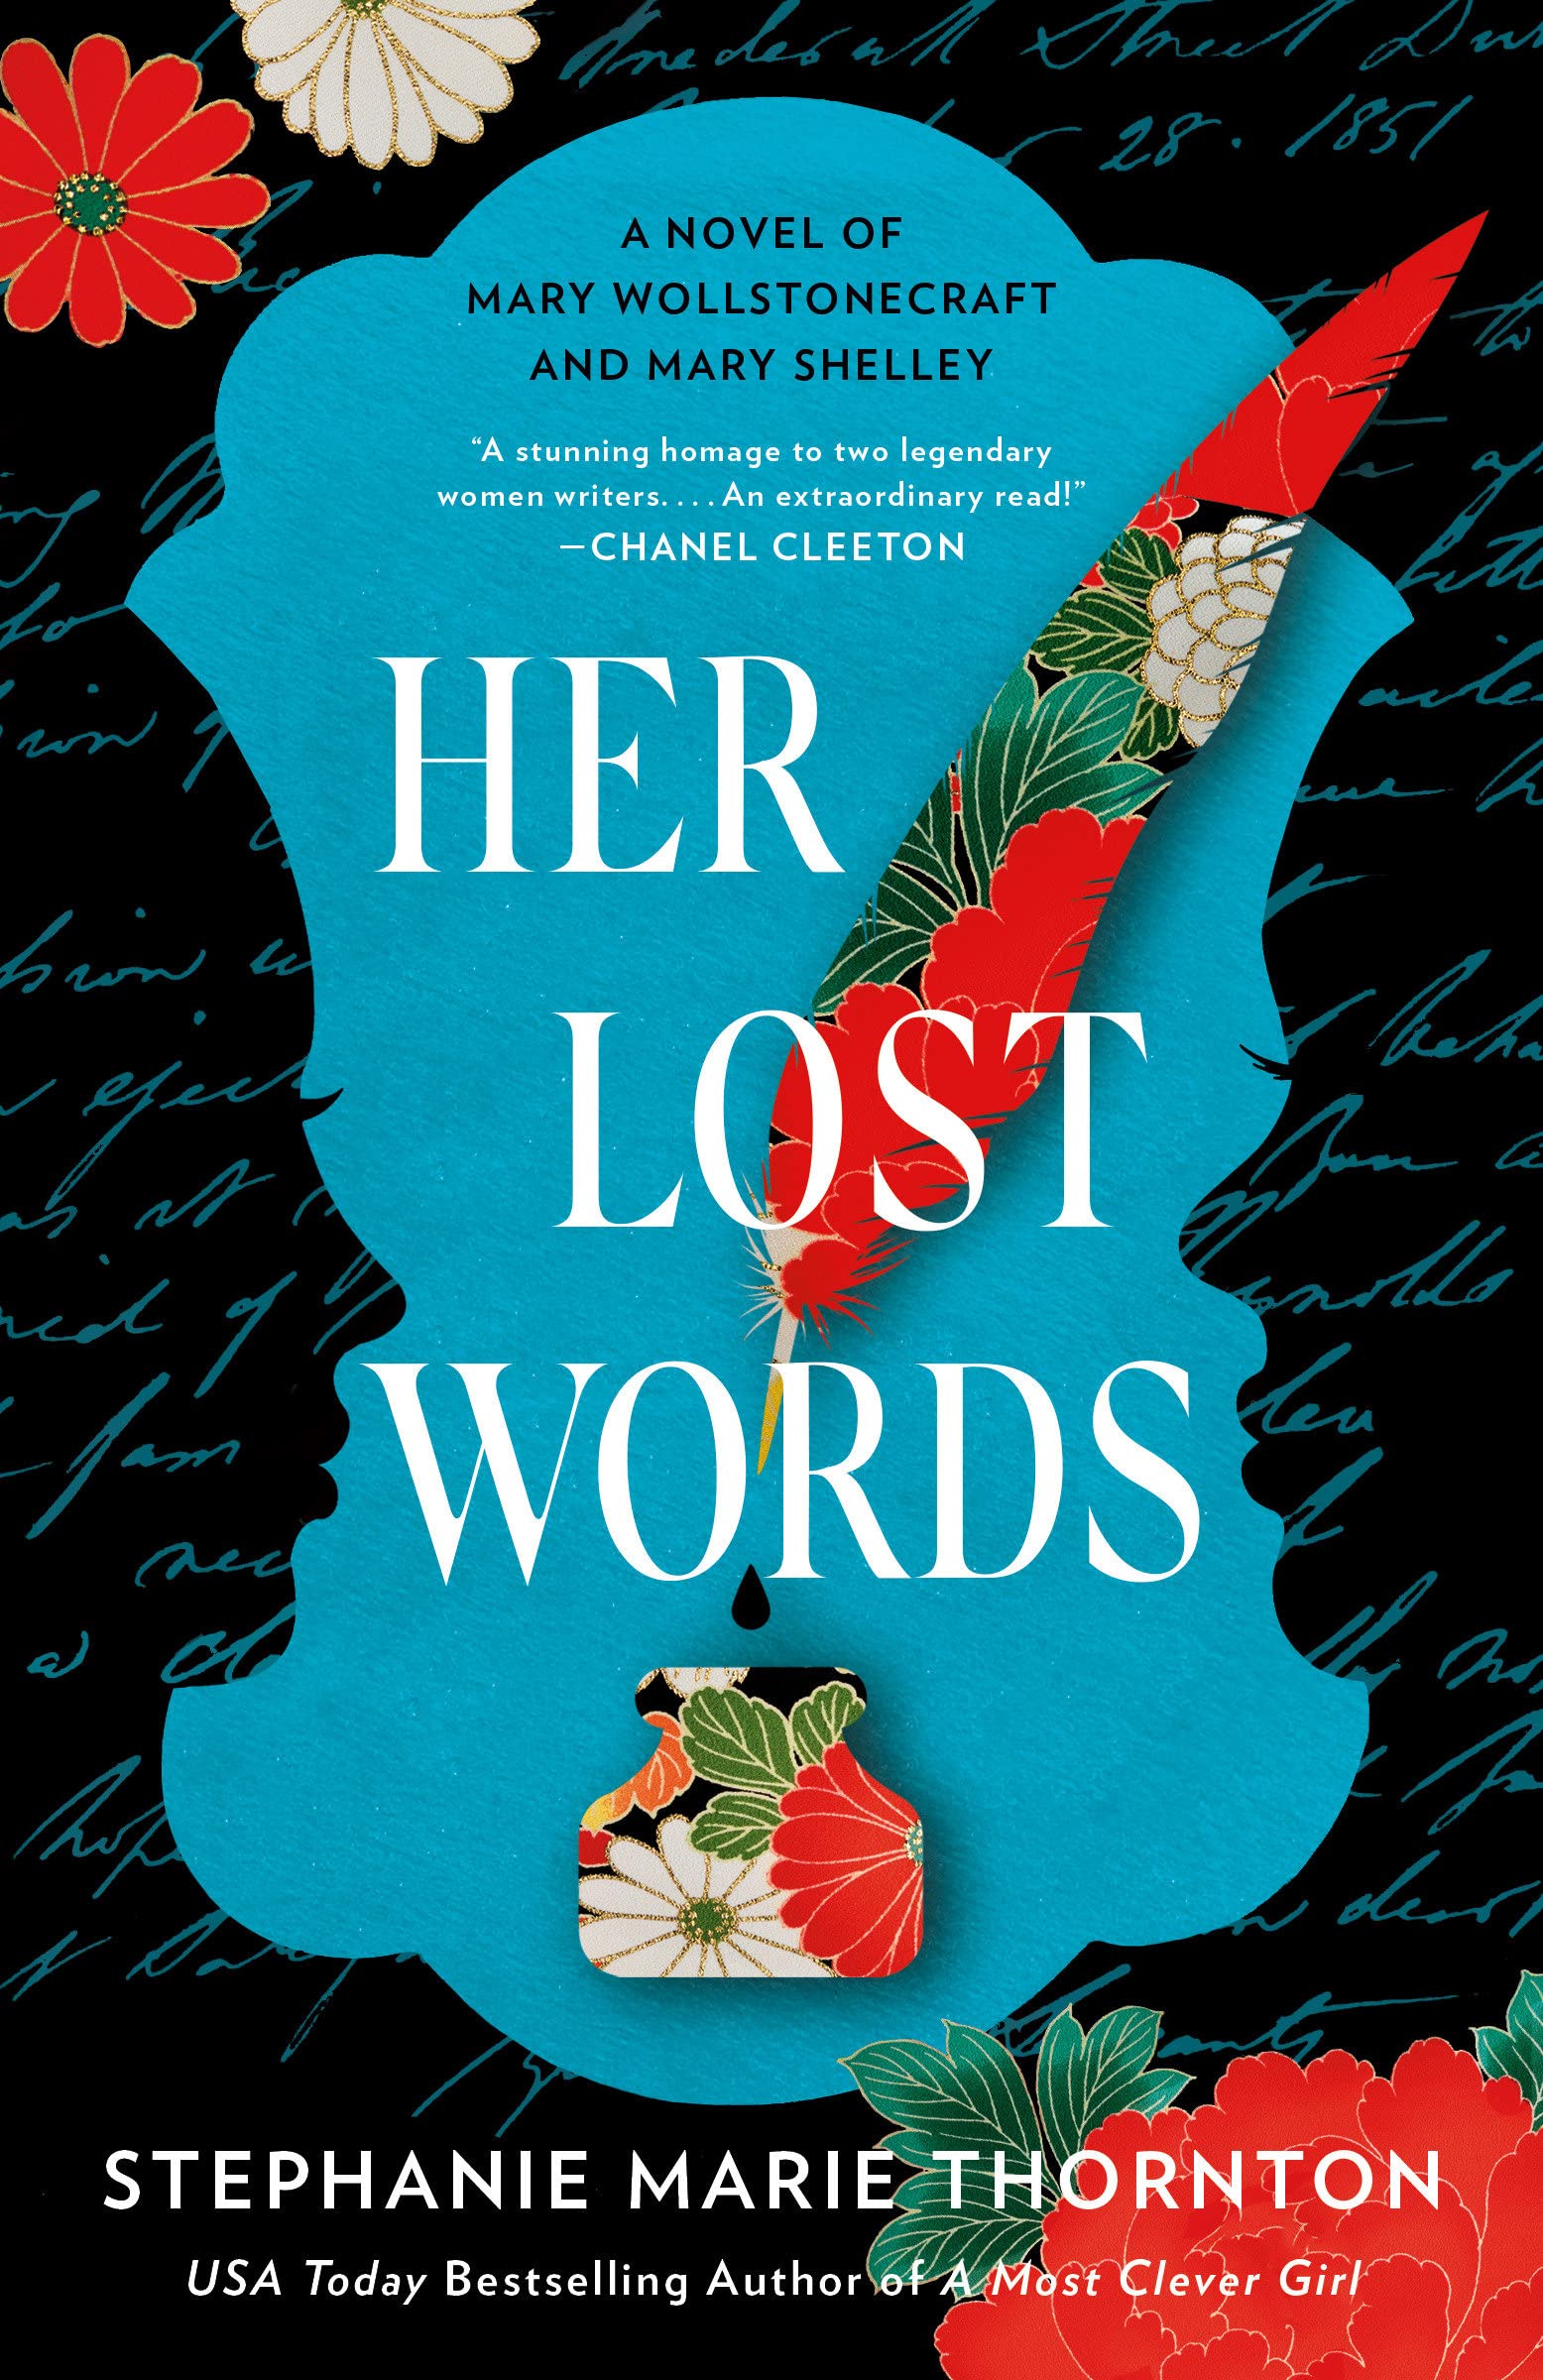 Image for "Her Lost Words"